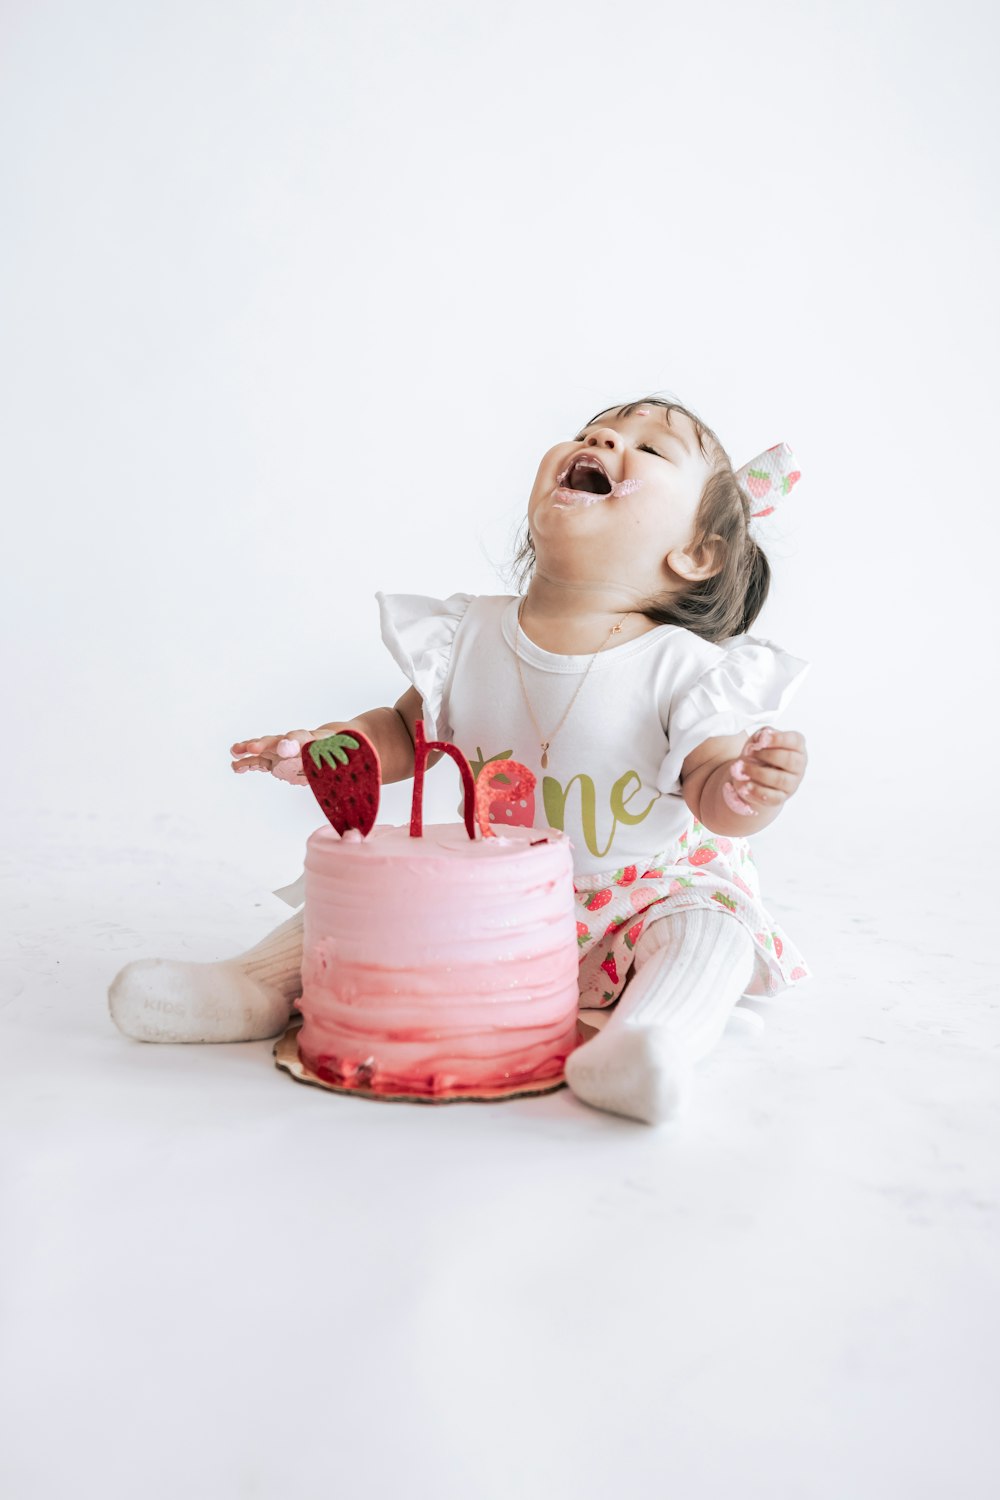 a little girl that is standing in front of a cake photo – Free Siete studio  Image on Unsplash